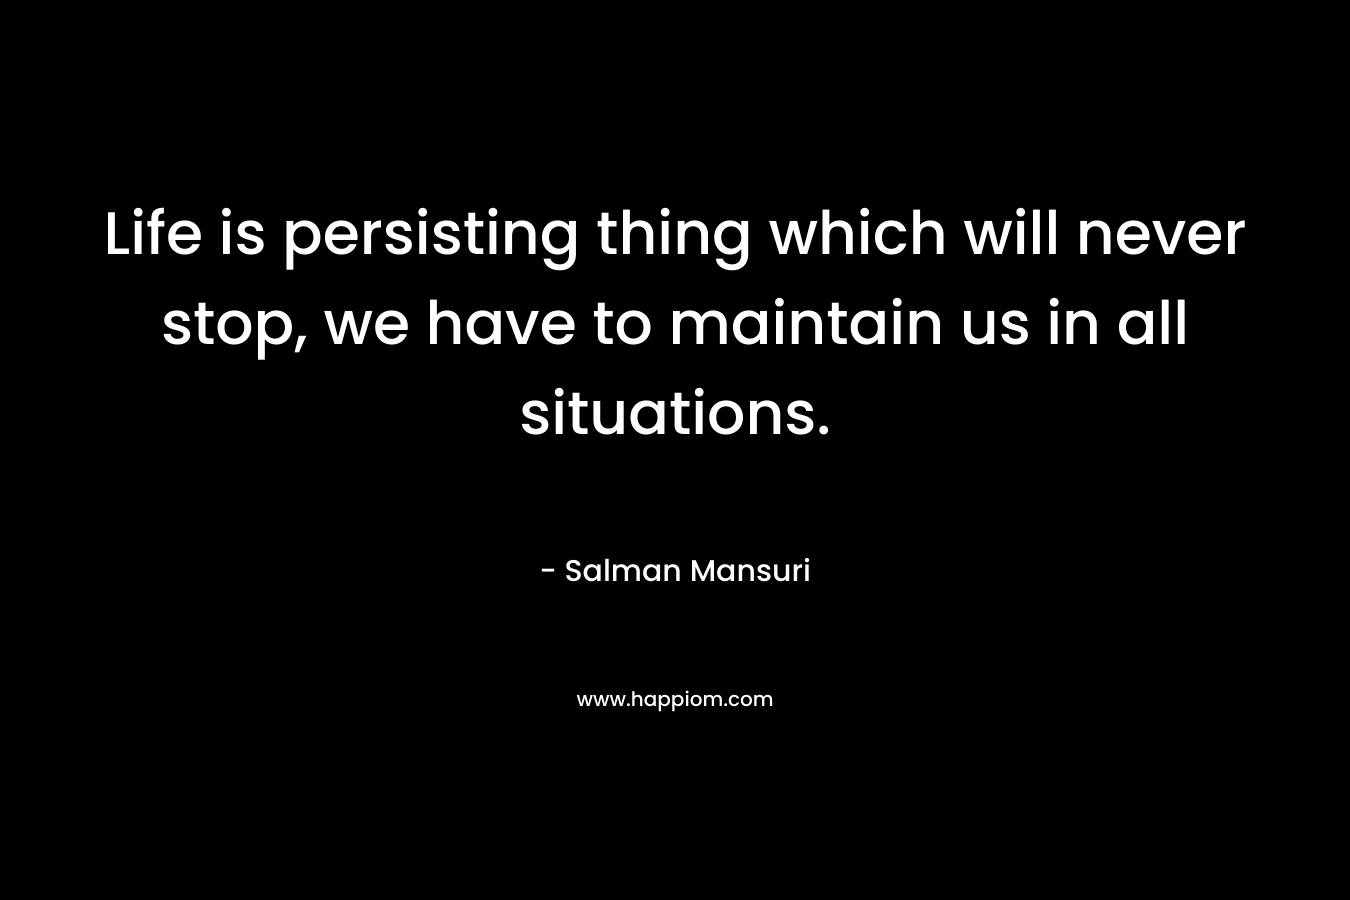 Life is persisting thing which will never stop, we have to maintain us in all situations.